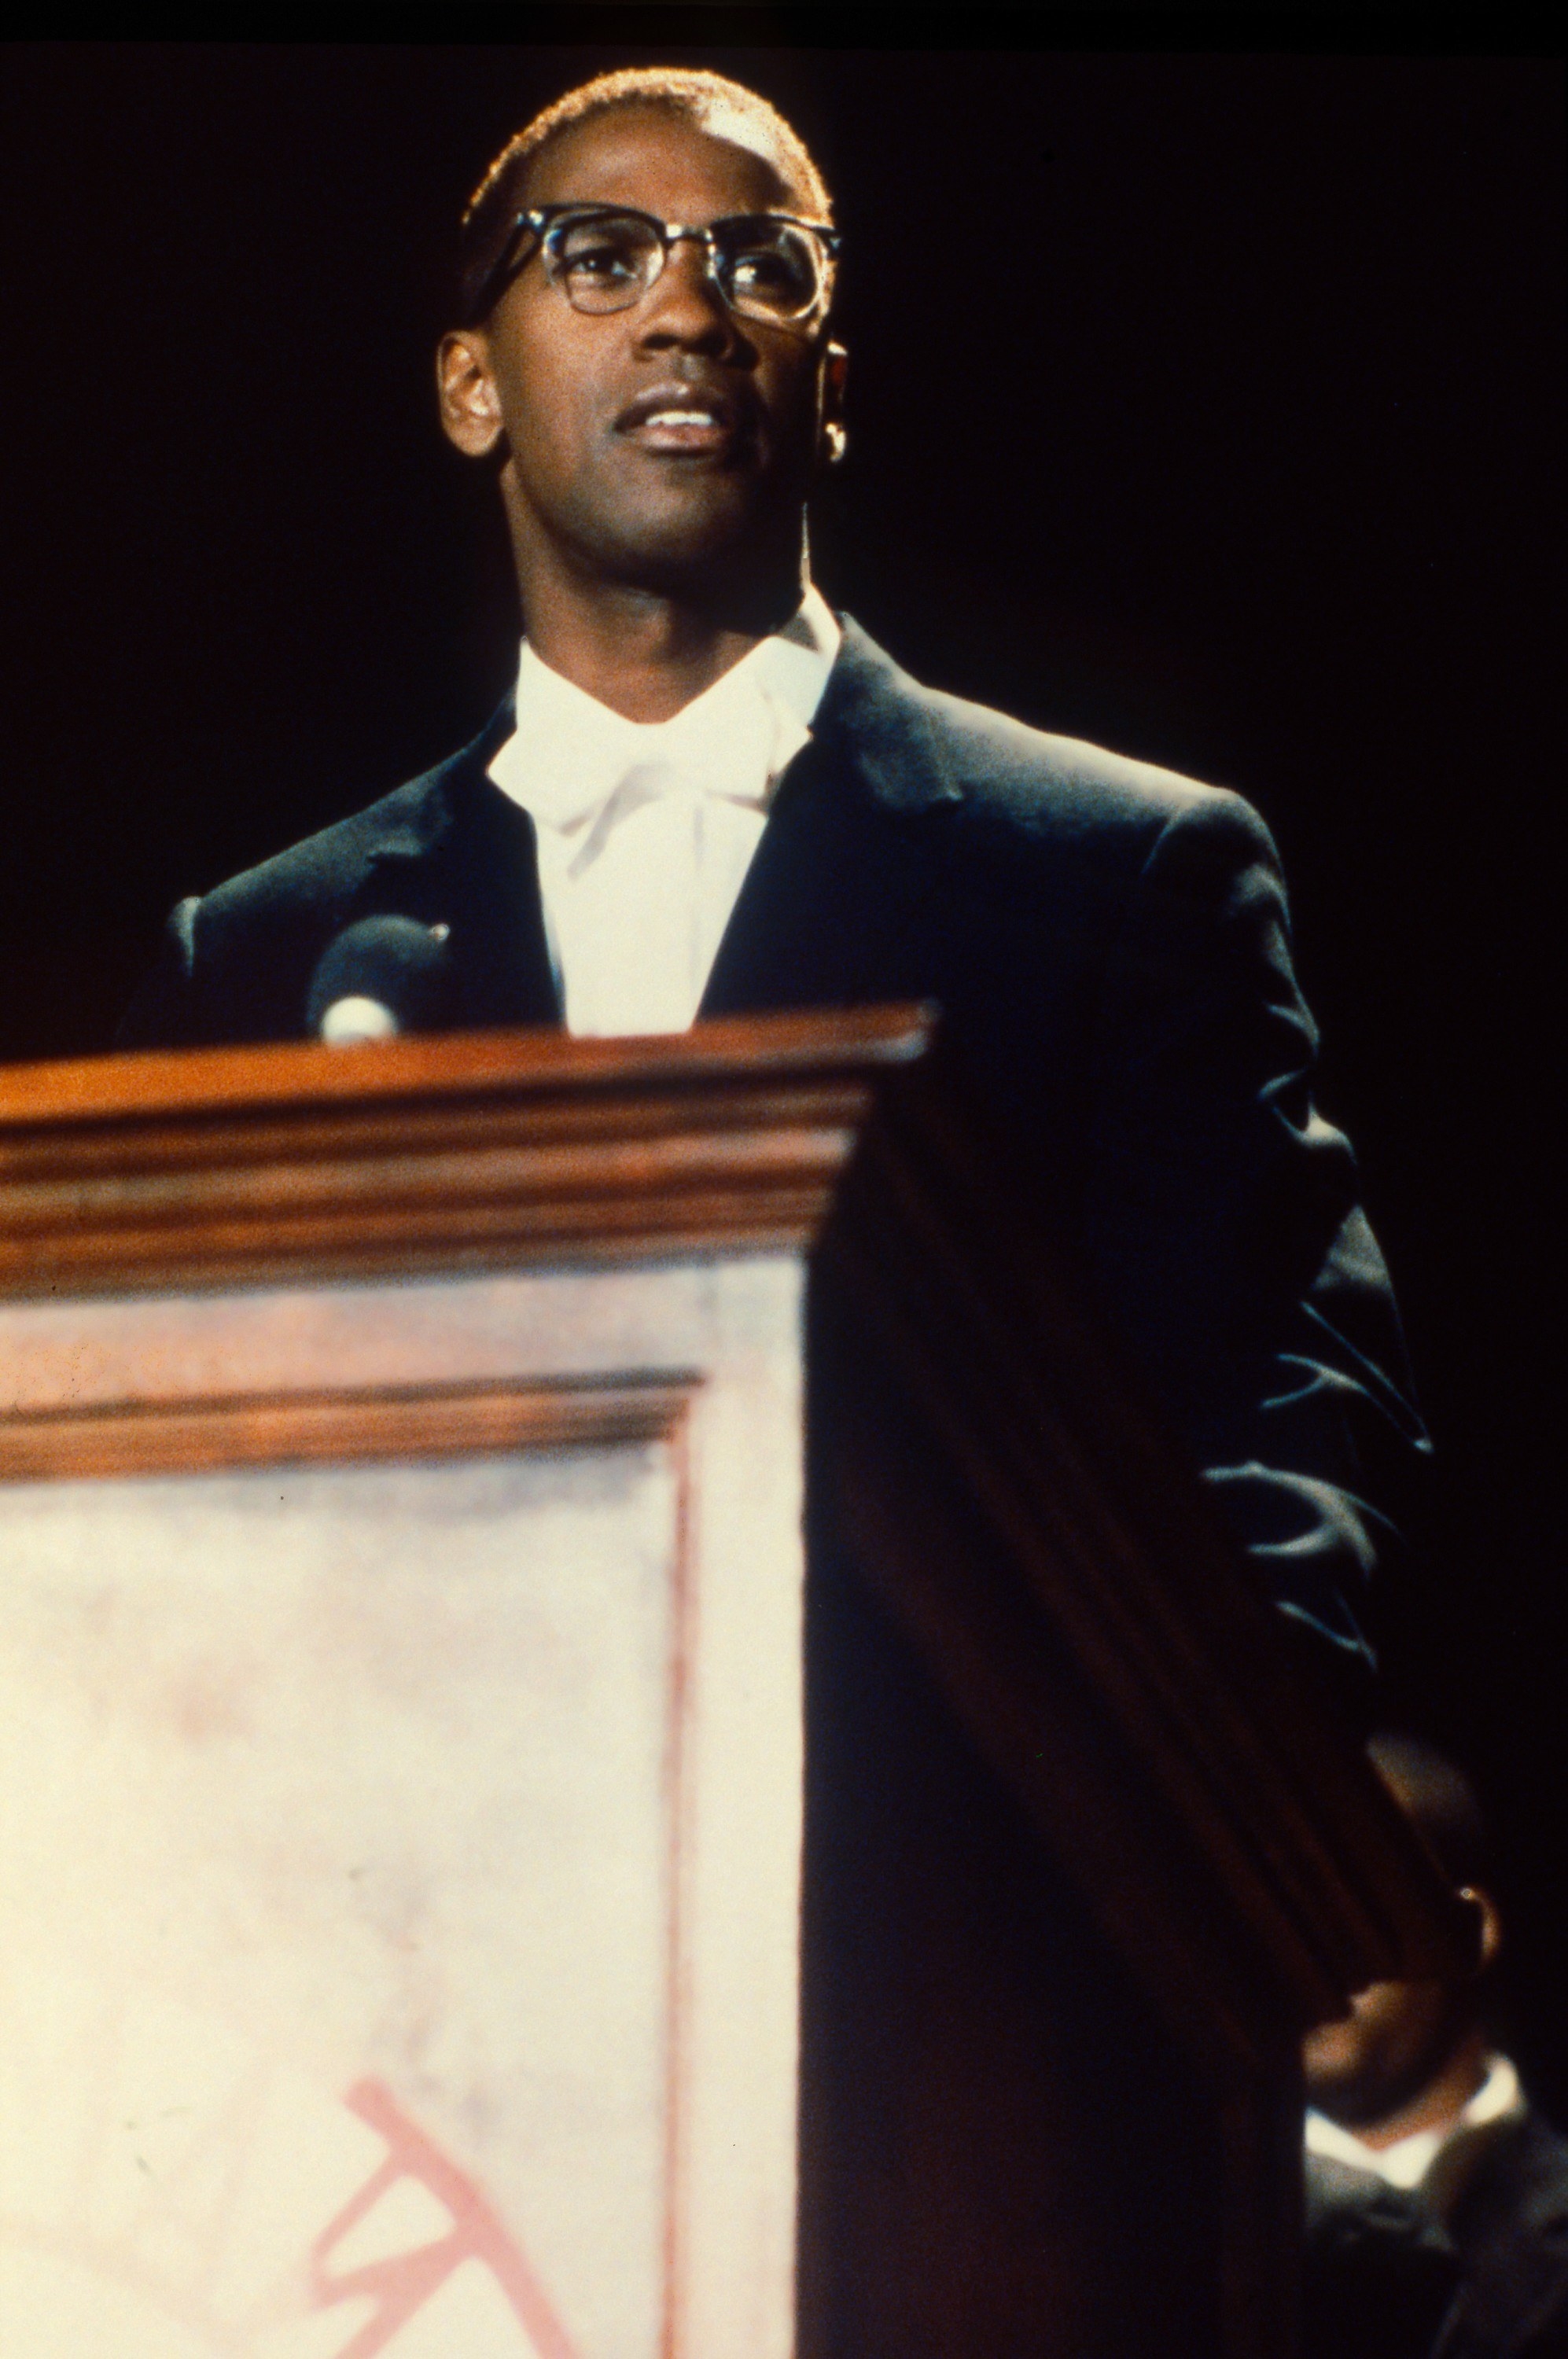 Denzel as Malcolm wearing glasses and a suit and bow tie and standing at a podium